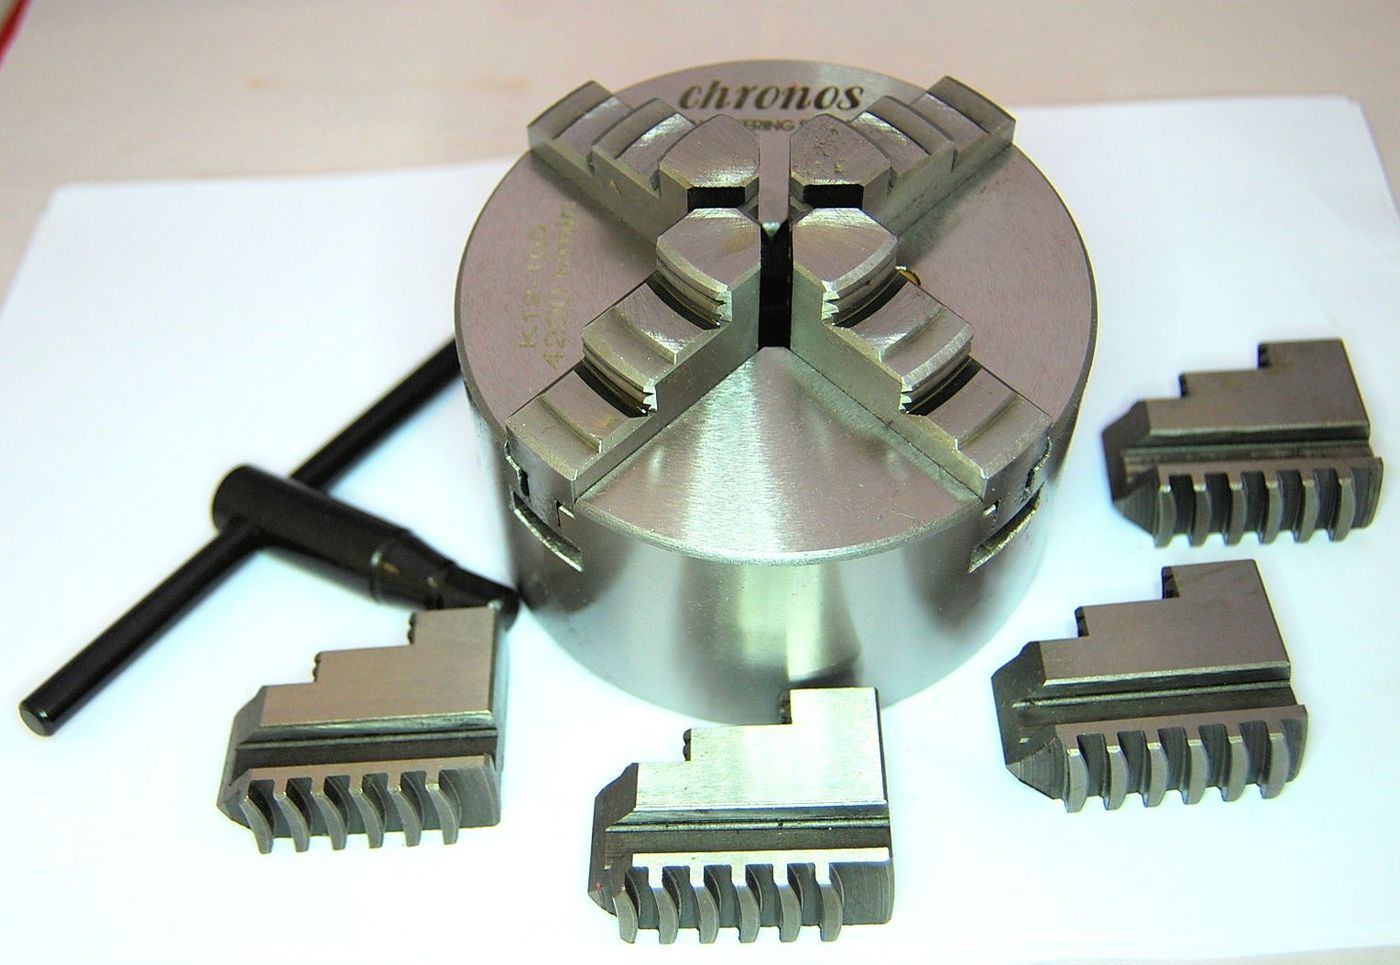 Autoslegend K12-100 4 Jaw Self-Centering Chuck with Spare Jaws for Lathe Milling 100mm 